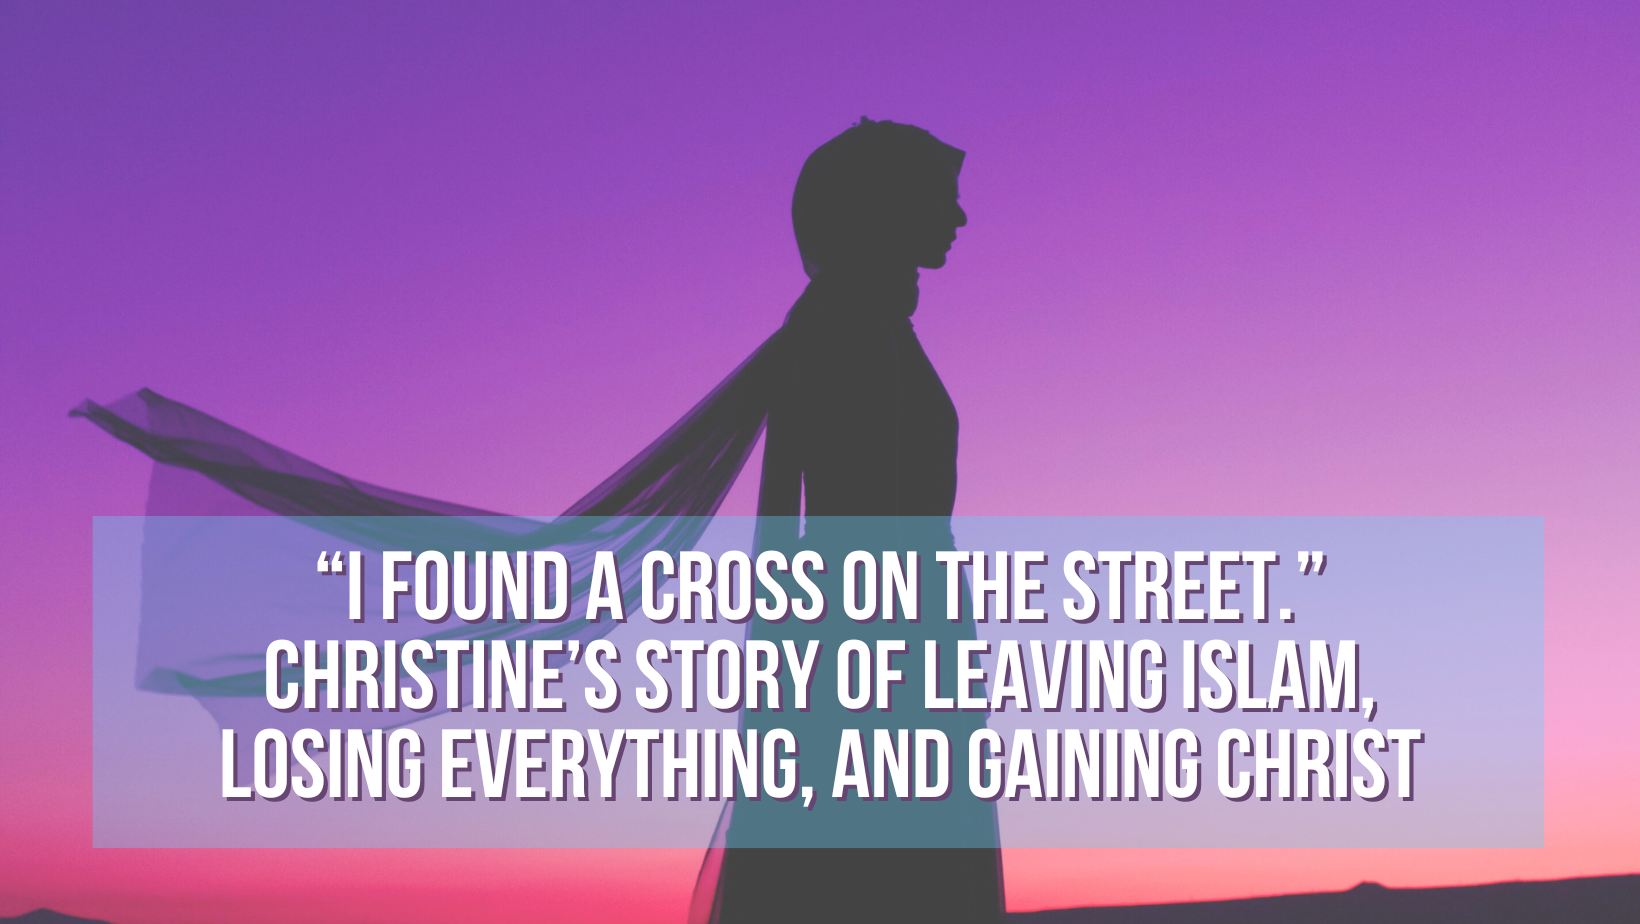 “I found a cross on the street.” Christine’s story of leaving Islam, losing everything, and gaining Christ